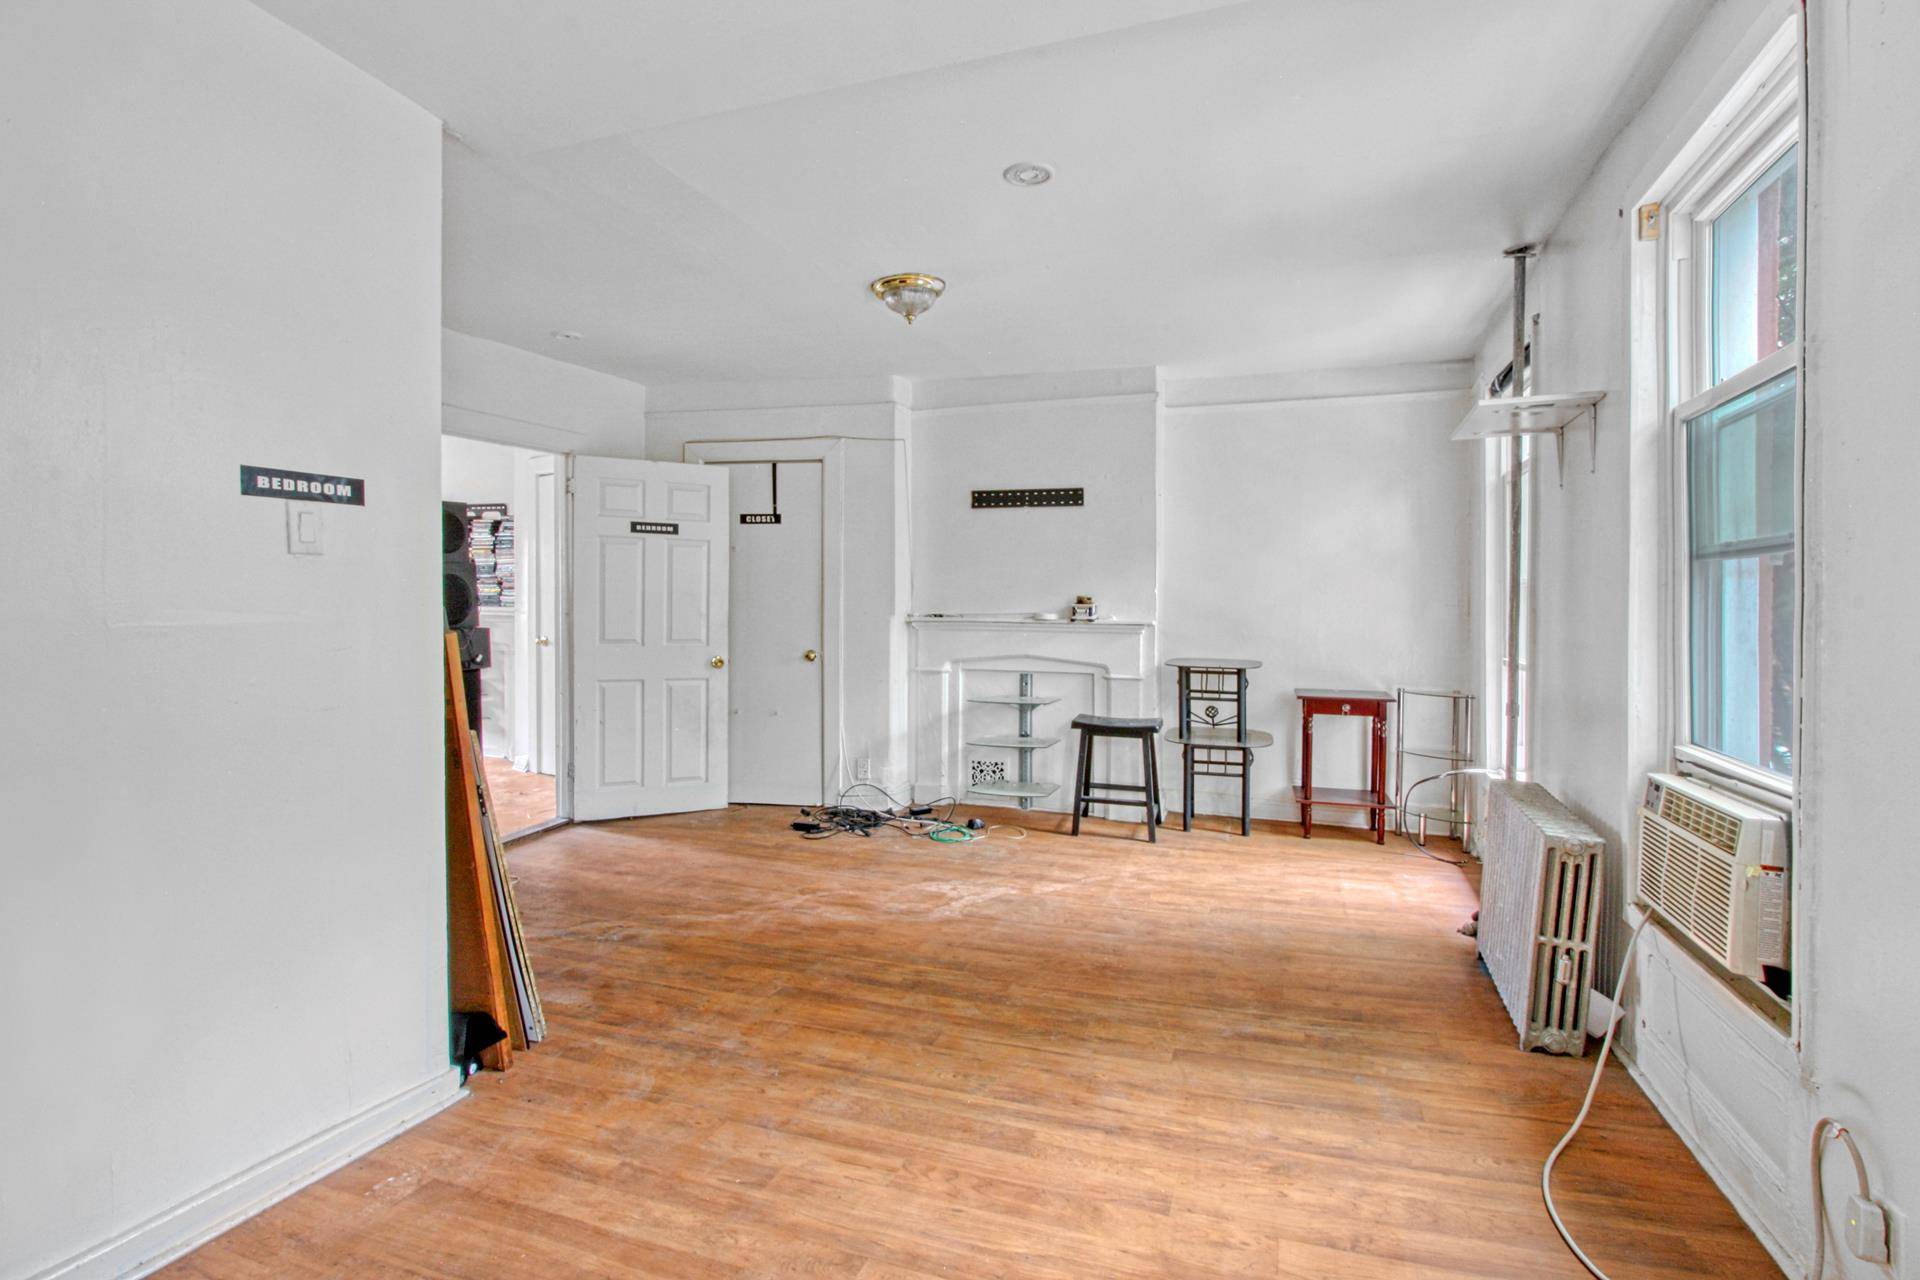 Priced to sell ! Introducing 35 Irving Place, a late nineteenth century two family townhouse located in Clinton Hill, nestled between Gates and Putnam Avenue.